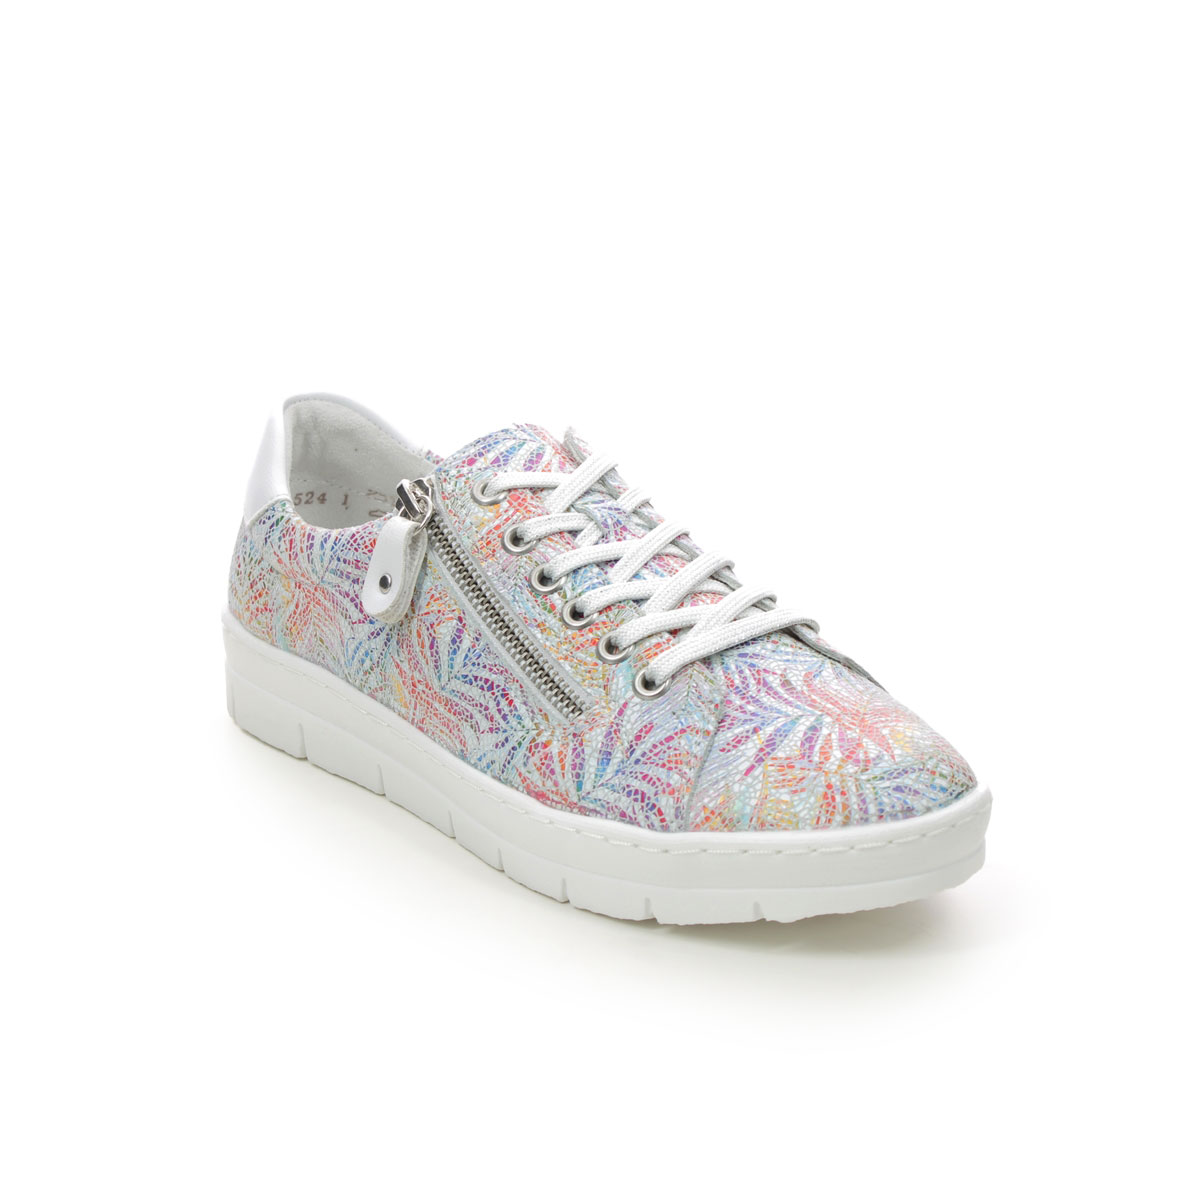 Remonte Ravenna 11 Floral Print Womens Trainers D5800-88 In Size 38 In Plain Floral Print